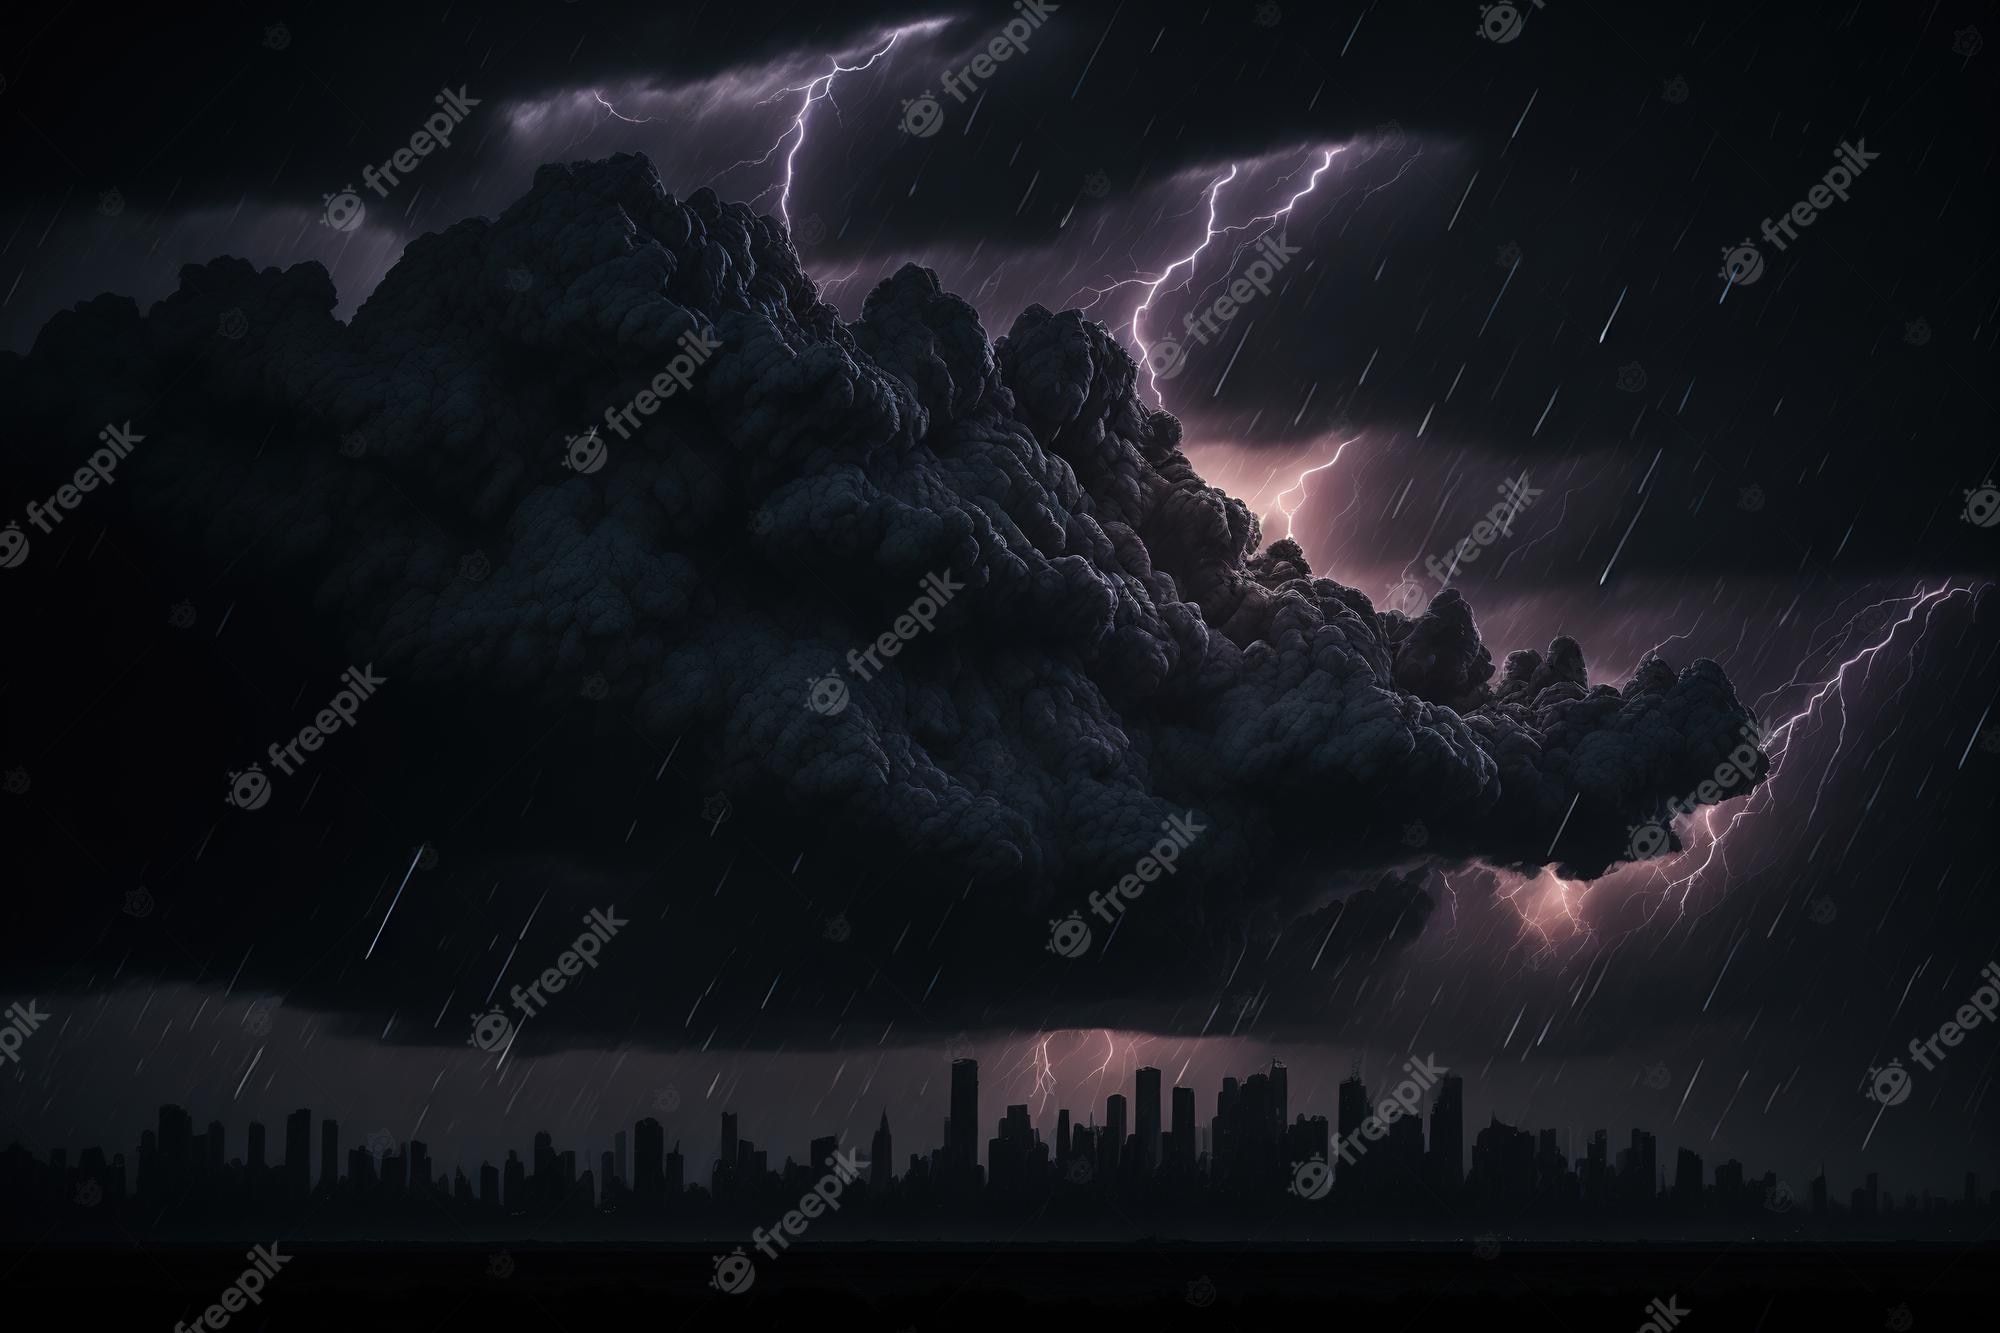 A dark sky with lightning and clouds over the city - Storm